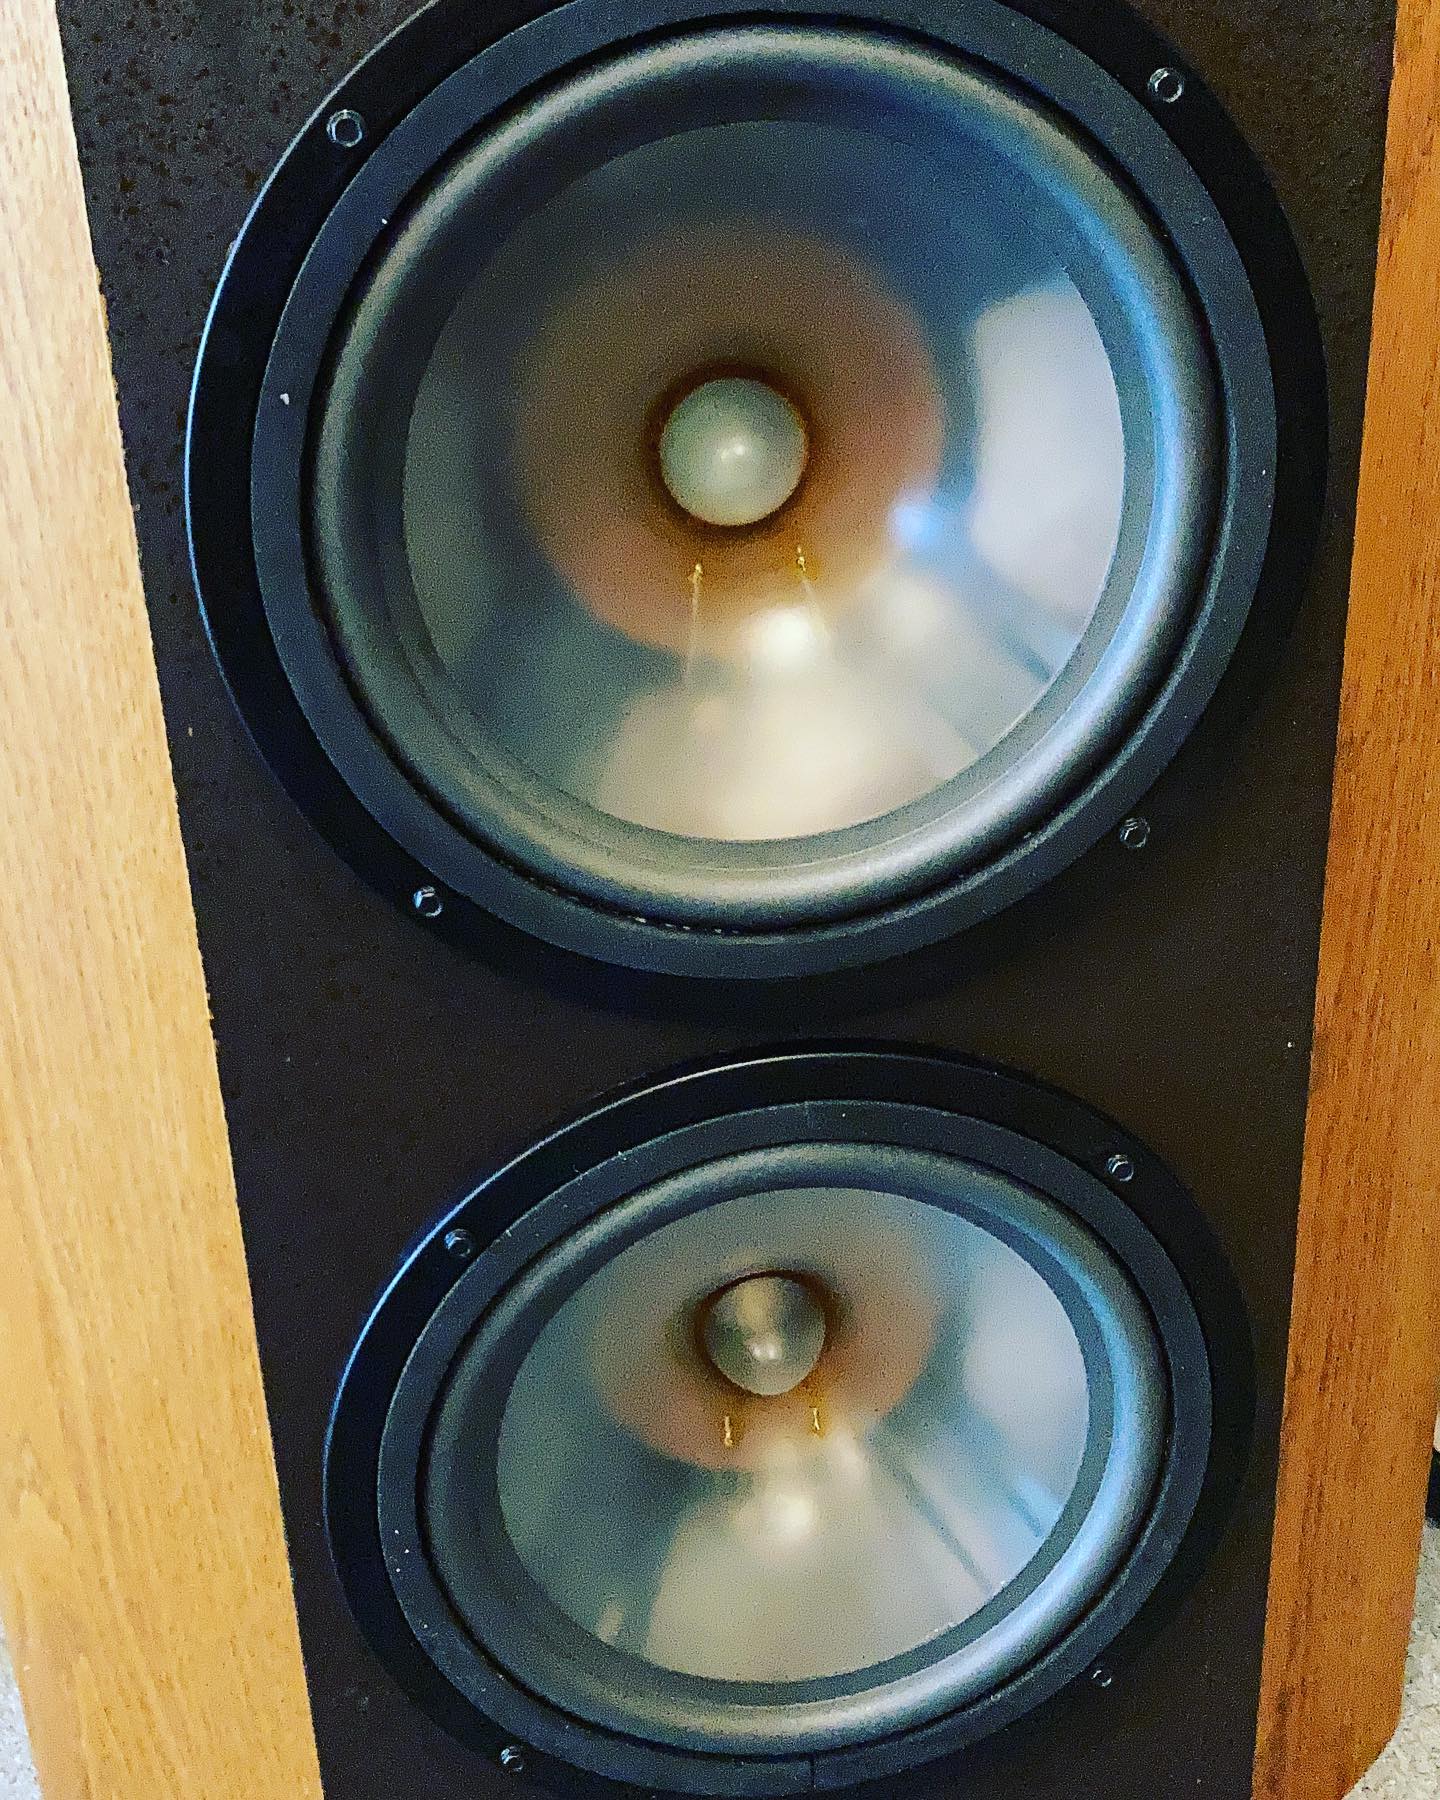 Philosophy for eternity:  If your wife is mad at you buy new speakers, she'll still be mad but you'll have new speakers